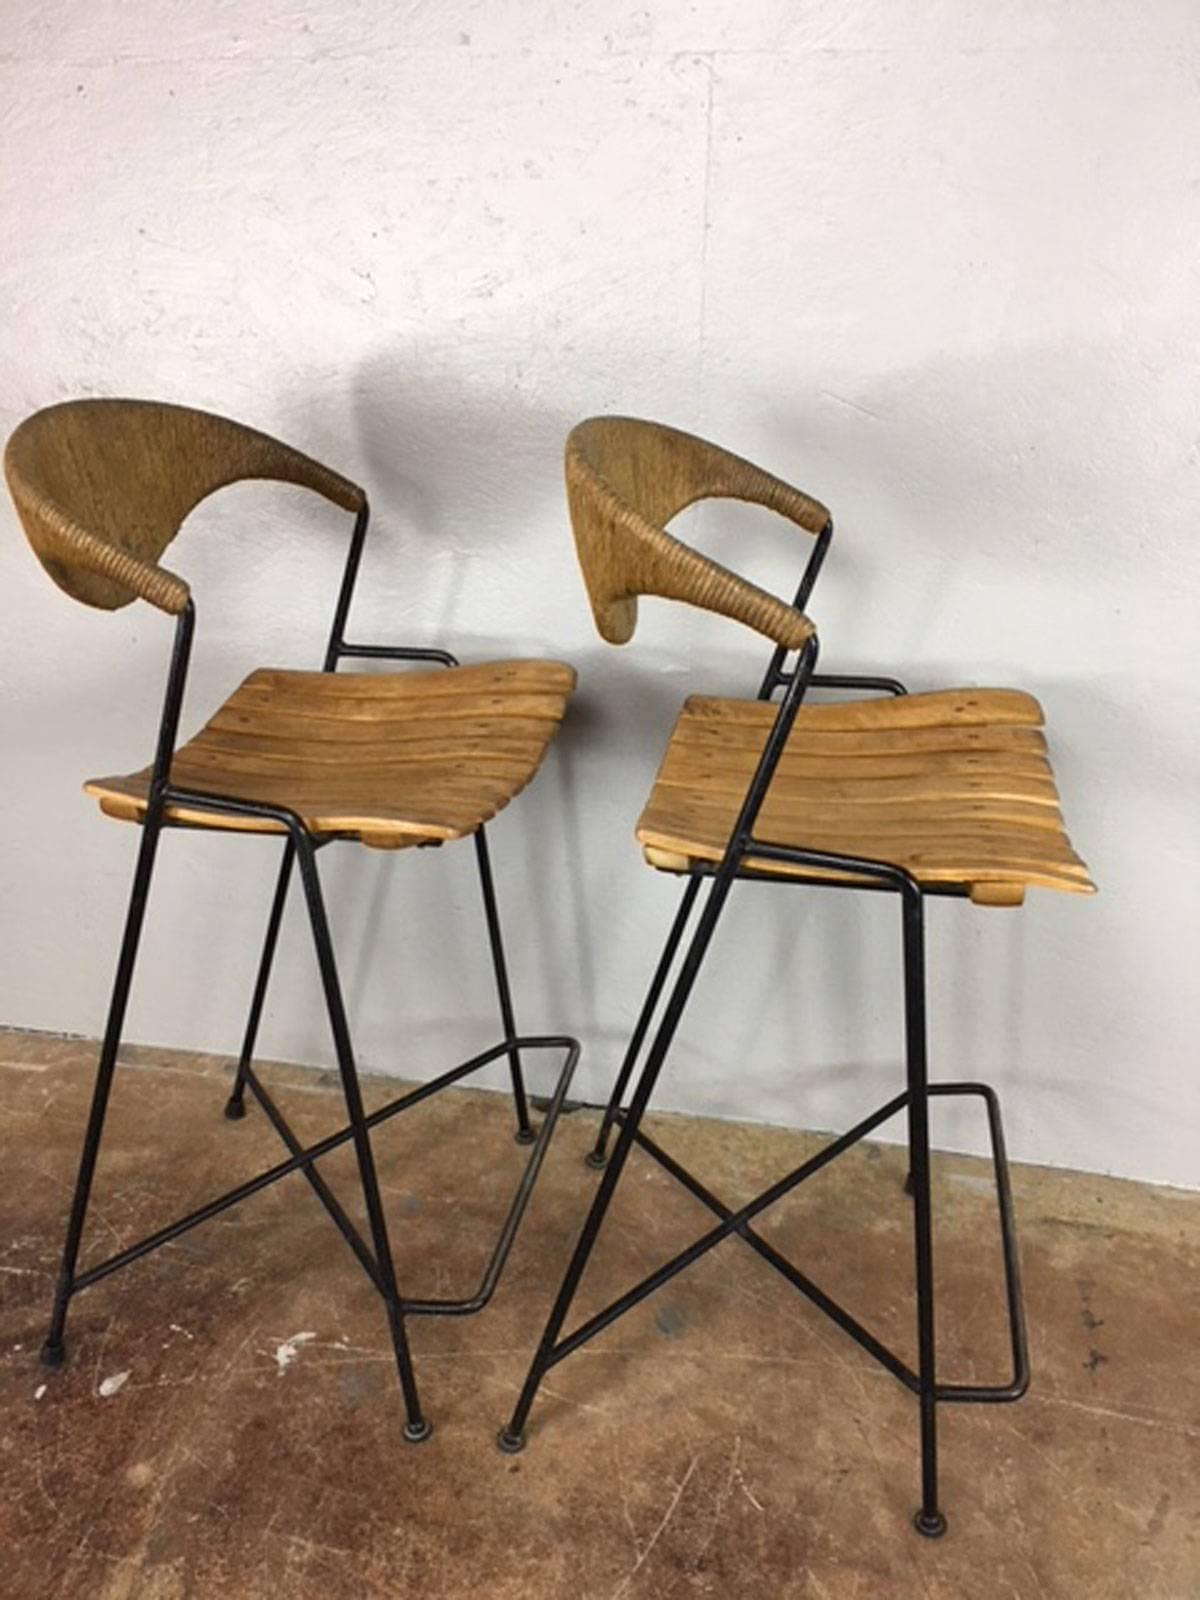 Sculptural Arthur Umanoff slat seat chord back design that combines cast iron frames with a modern look. Original condition, circa 1950s. Measure: Seat height is 25 inches.
 